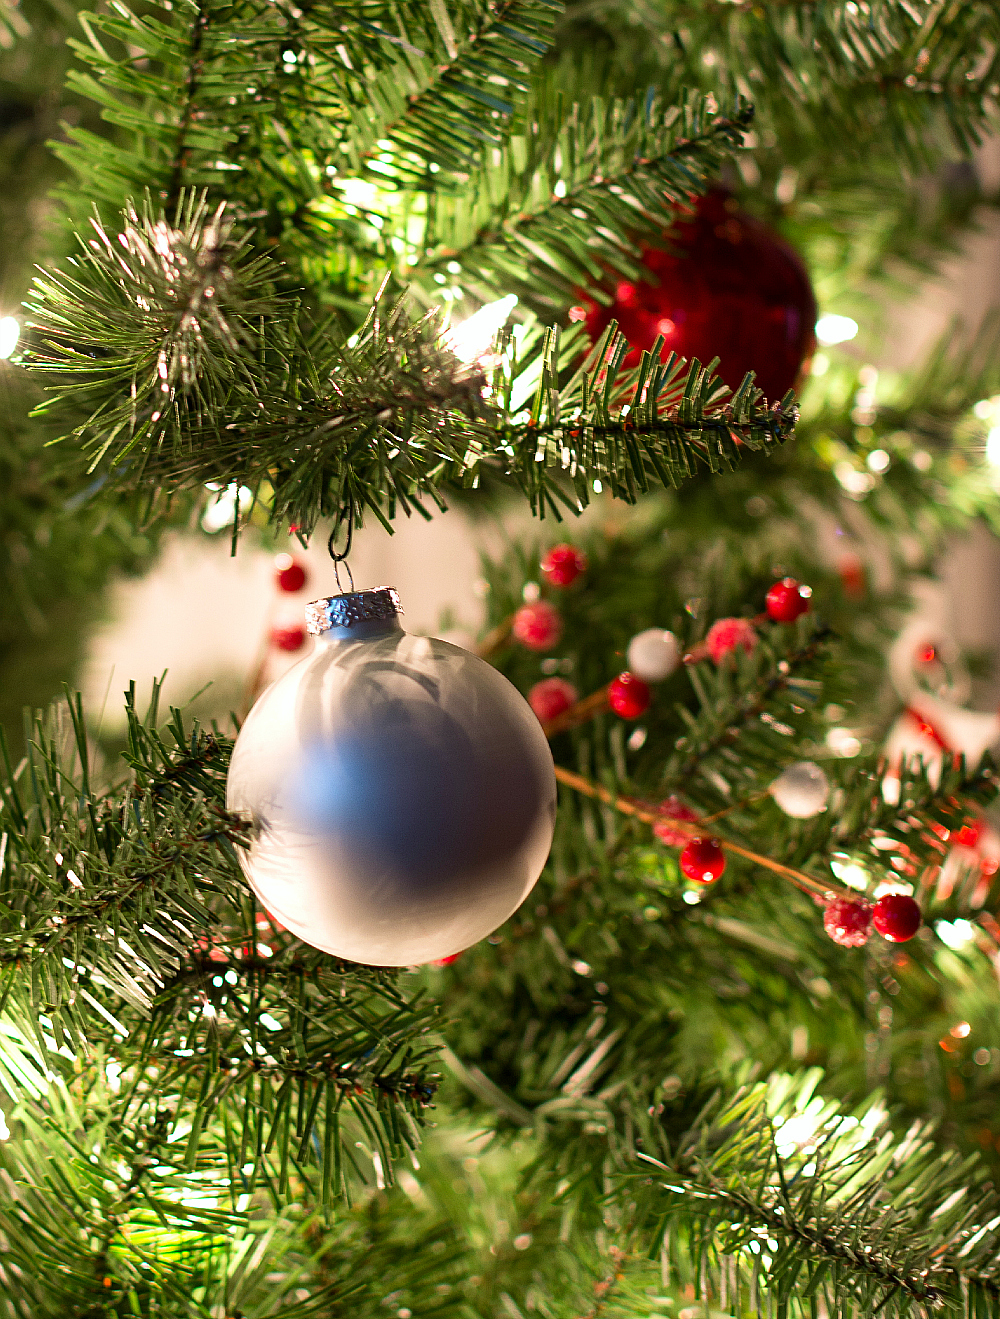 Christmas-Tree-Red-White-Ornaments (11 of 17)